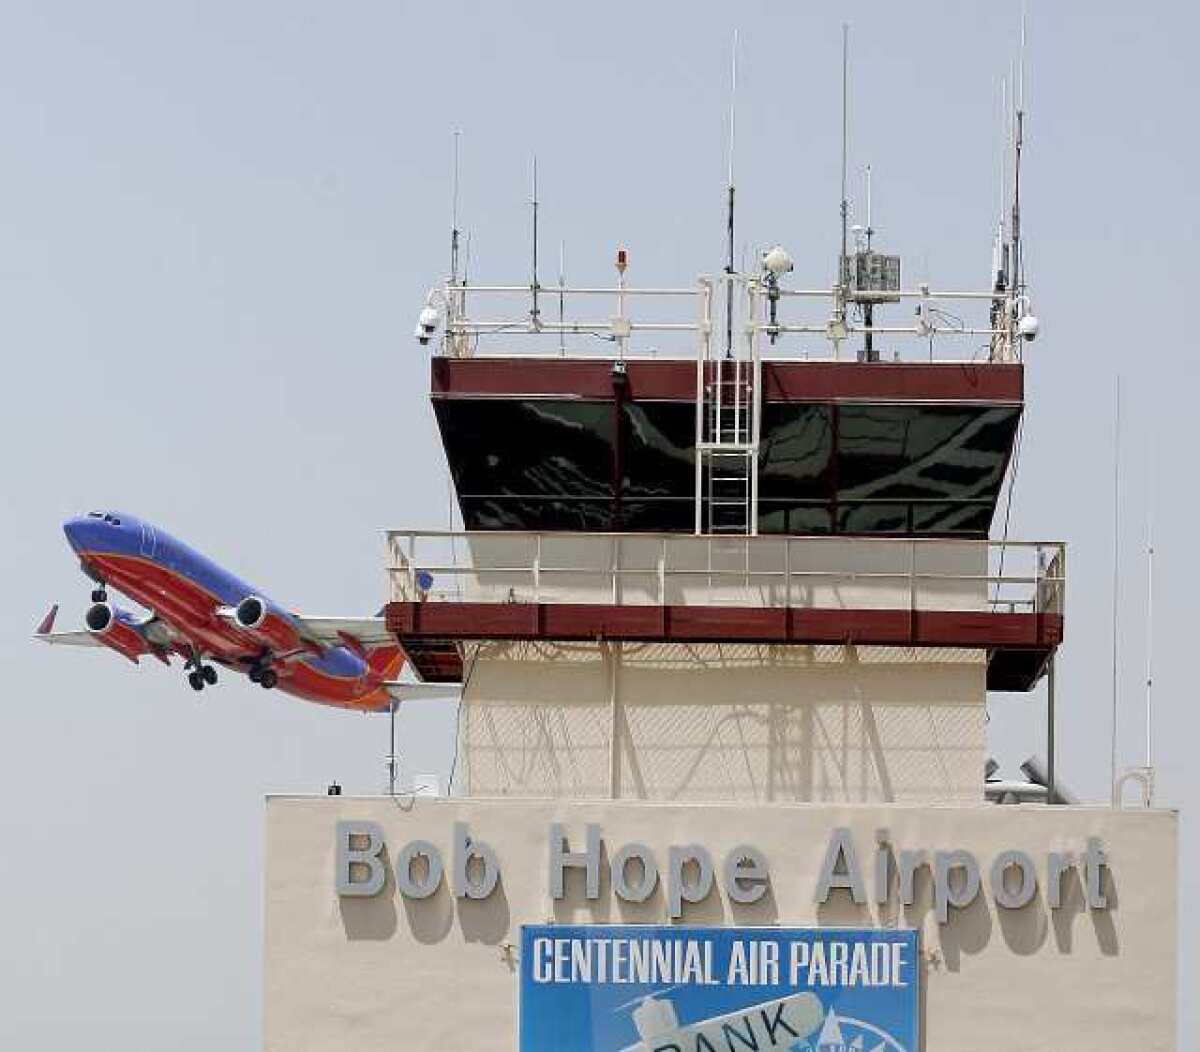 Fitch dropped Burbank-Glendale-Pasadena Airport Authority bond ratings to A+ from AA- this week.